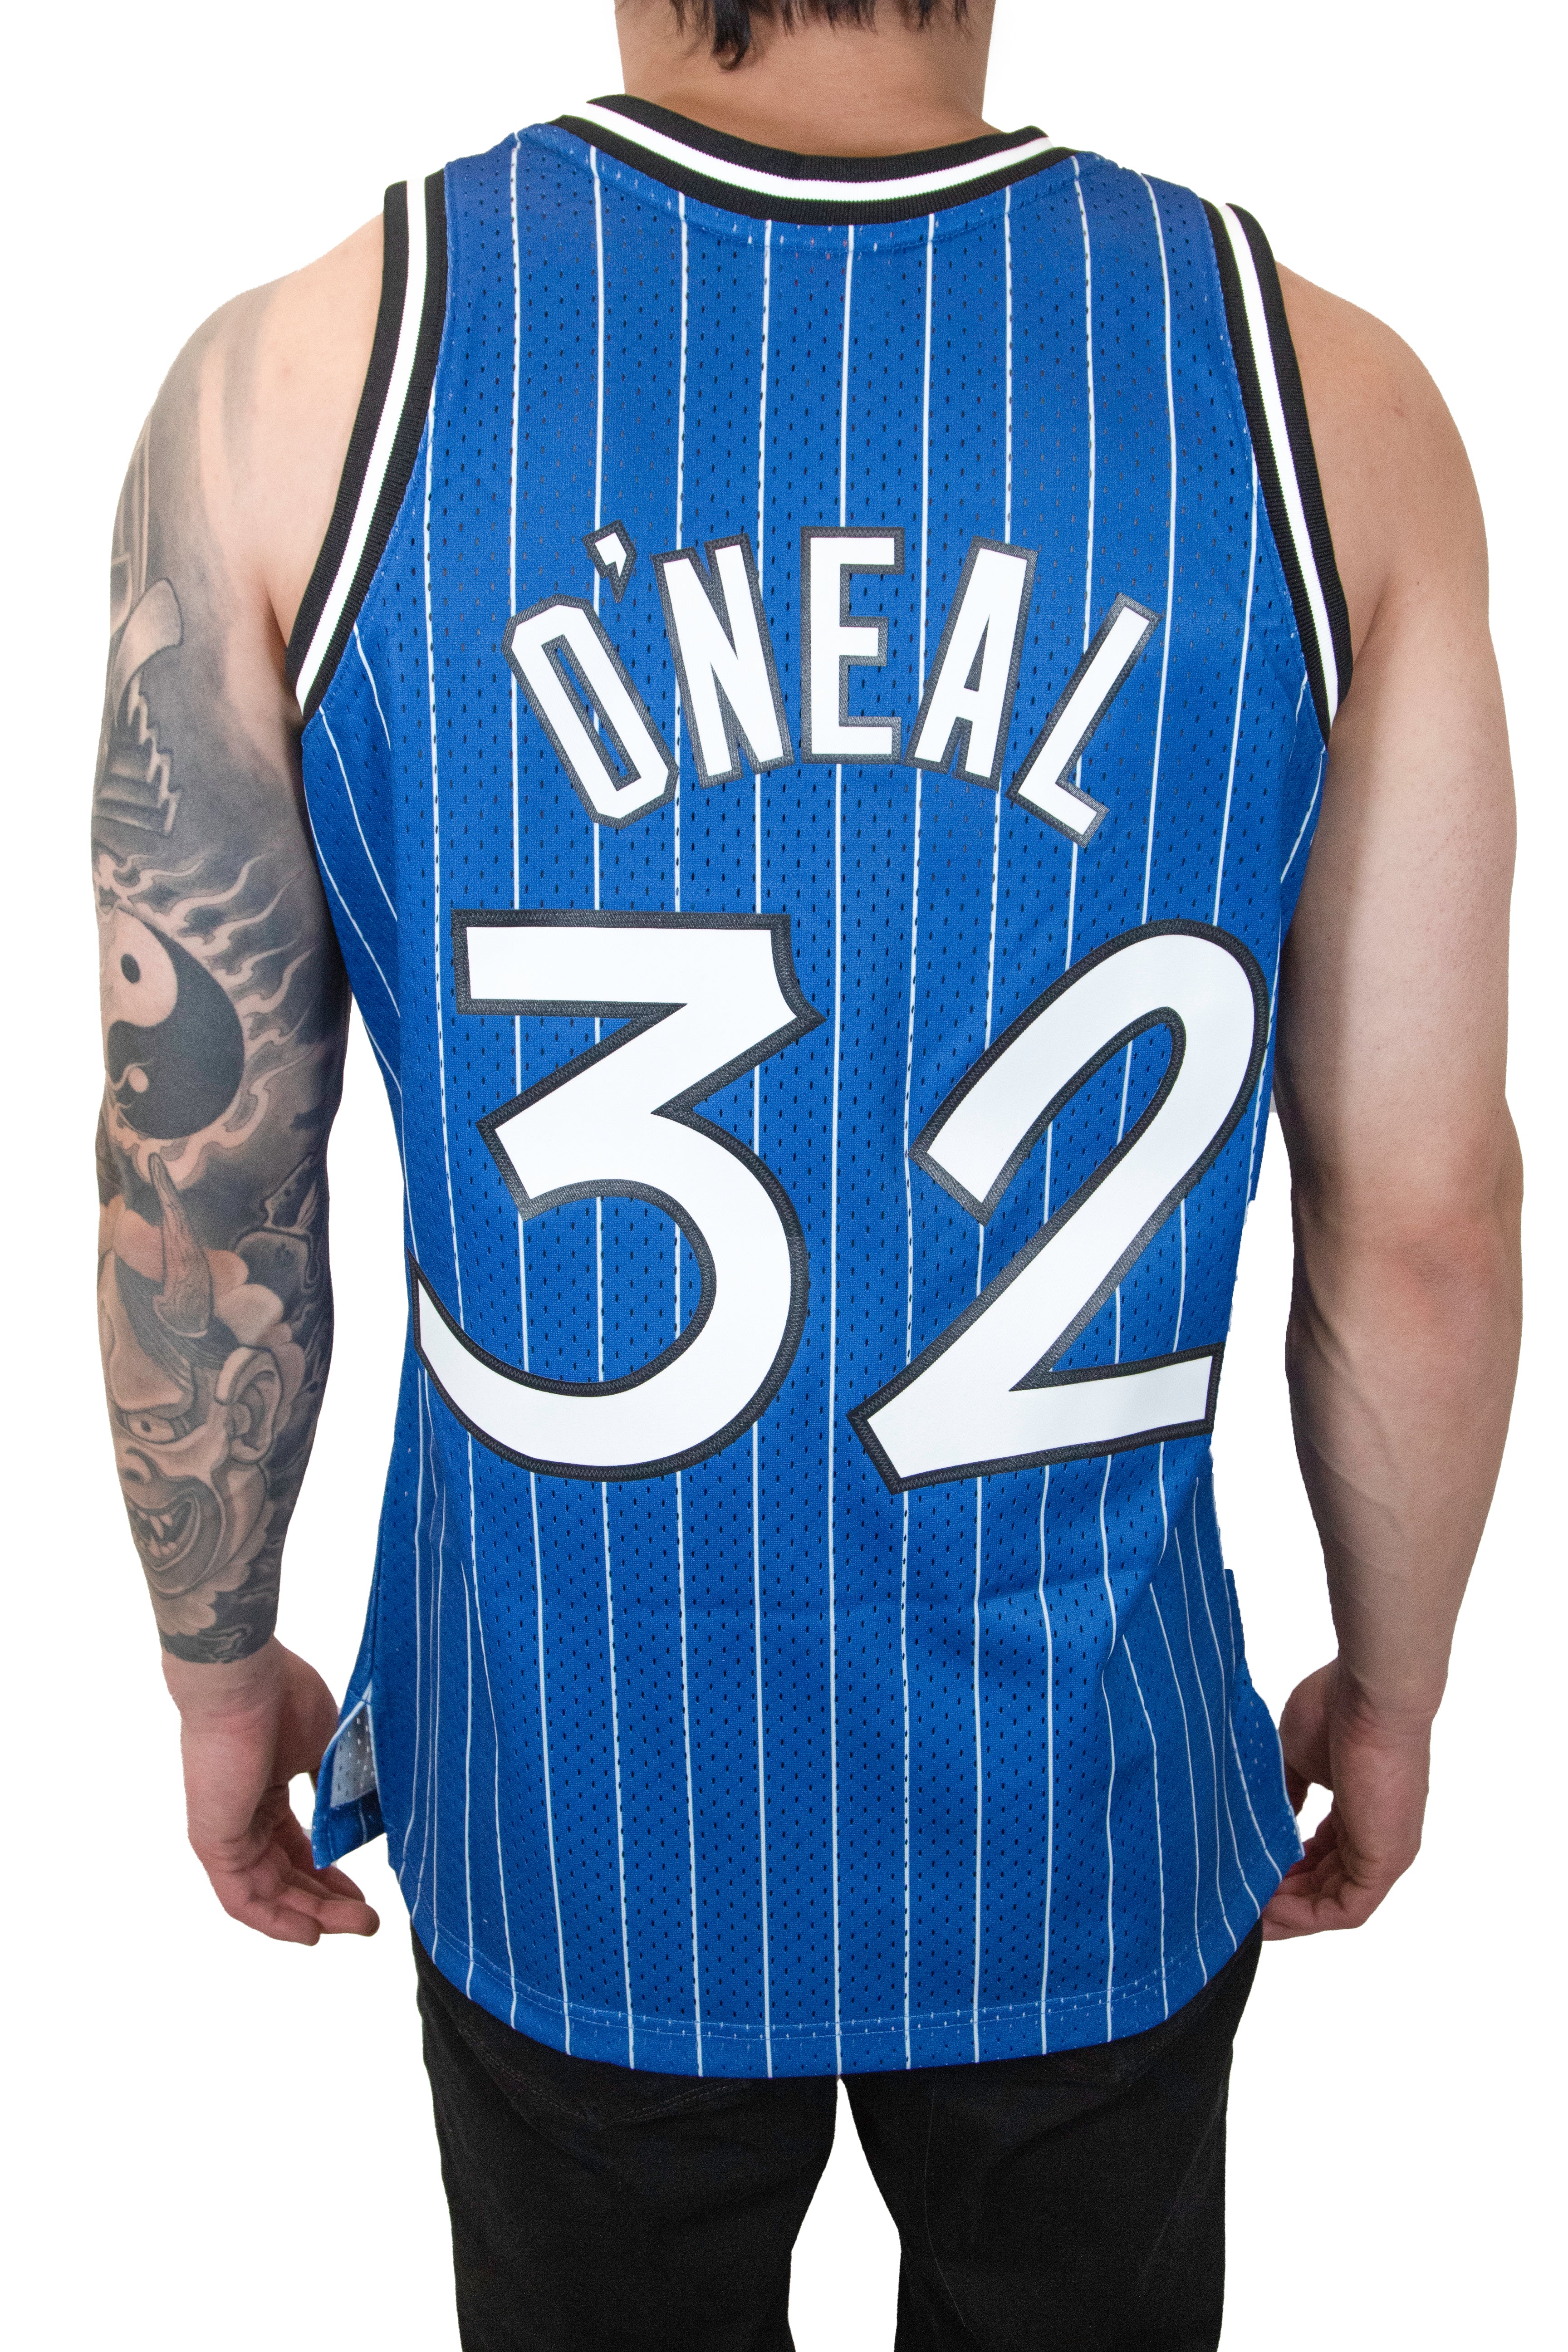 Shaquille O'Neal Jersey, Shaquille O'Neal Magic Shirts, Apparel